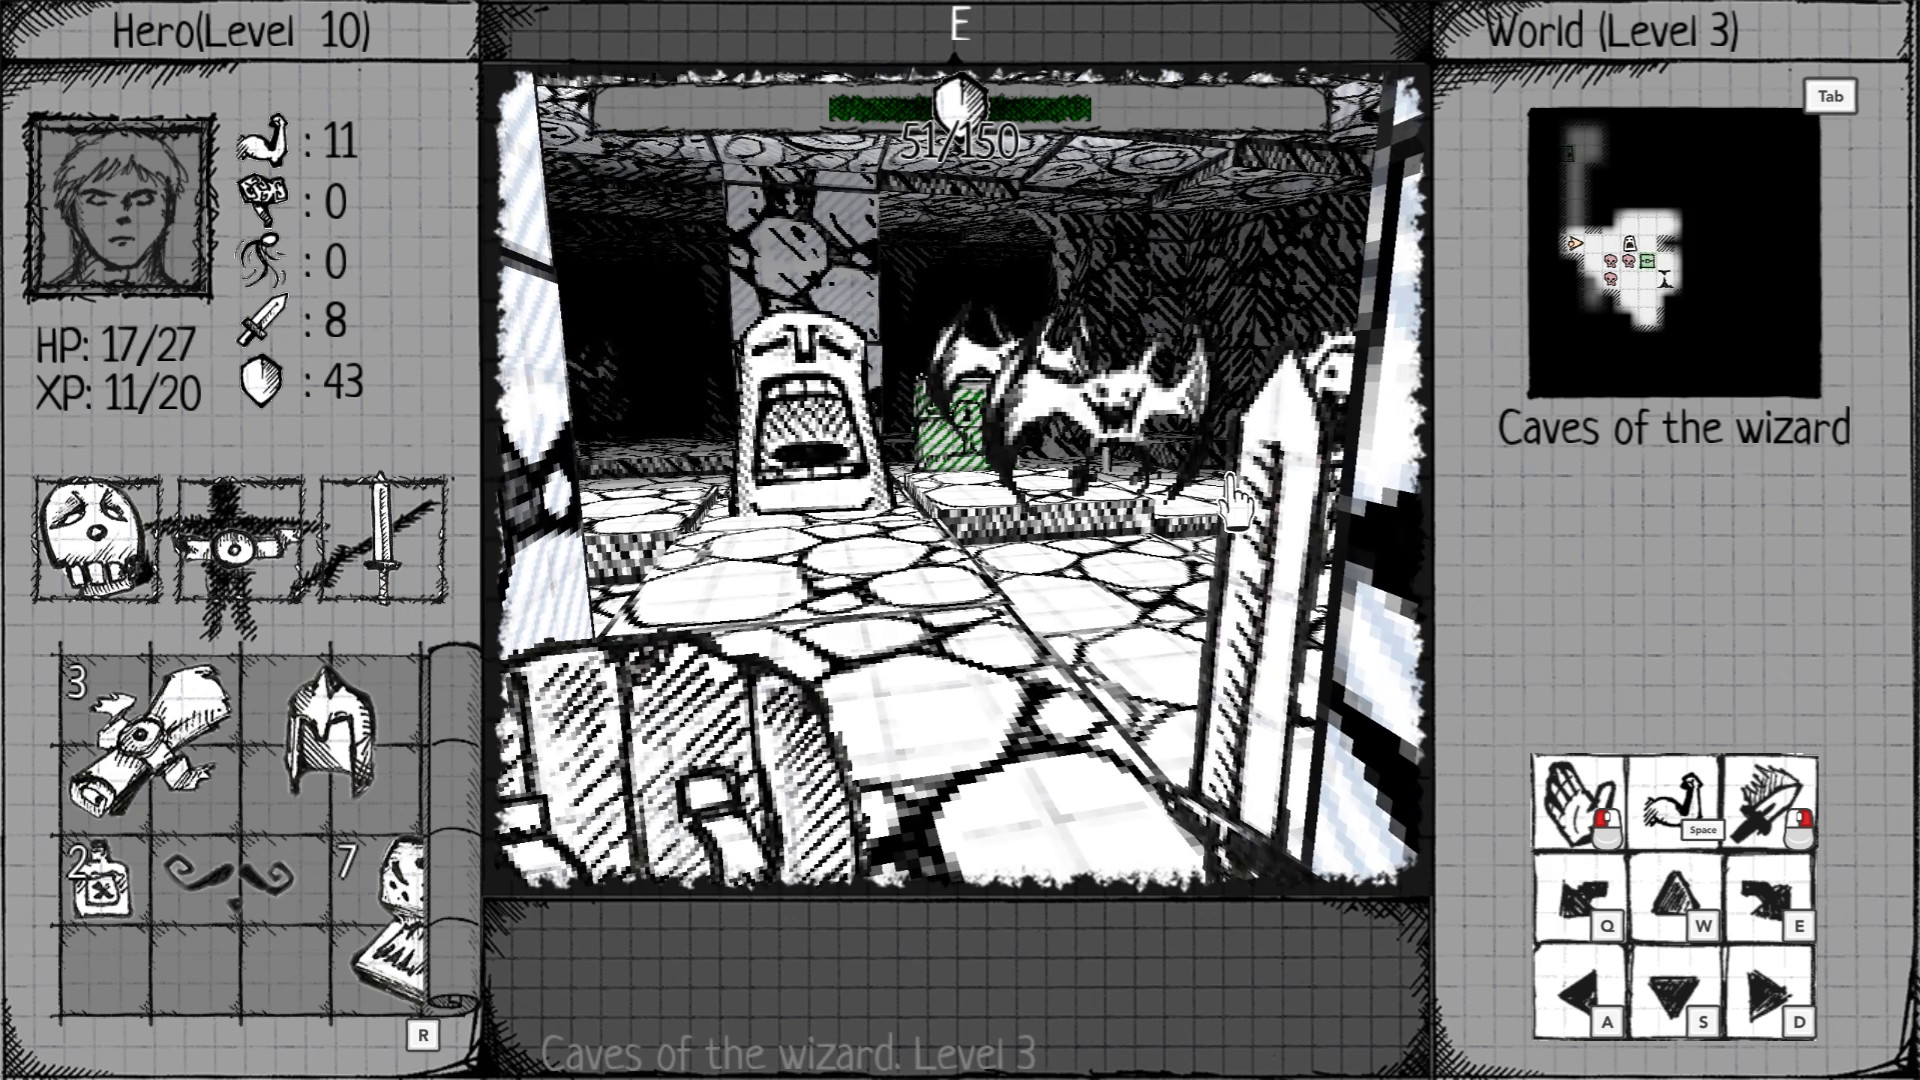 Drawngeon: Dungeons of Ink and Paper Steam CD Key 1.39$